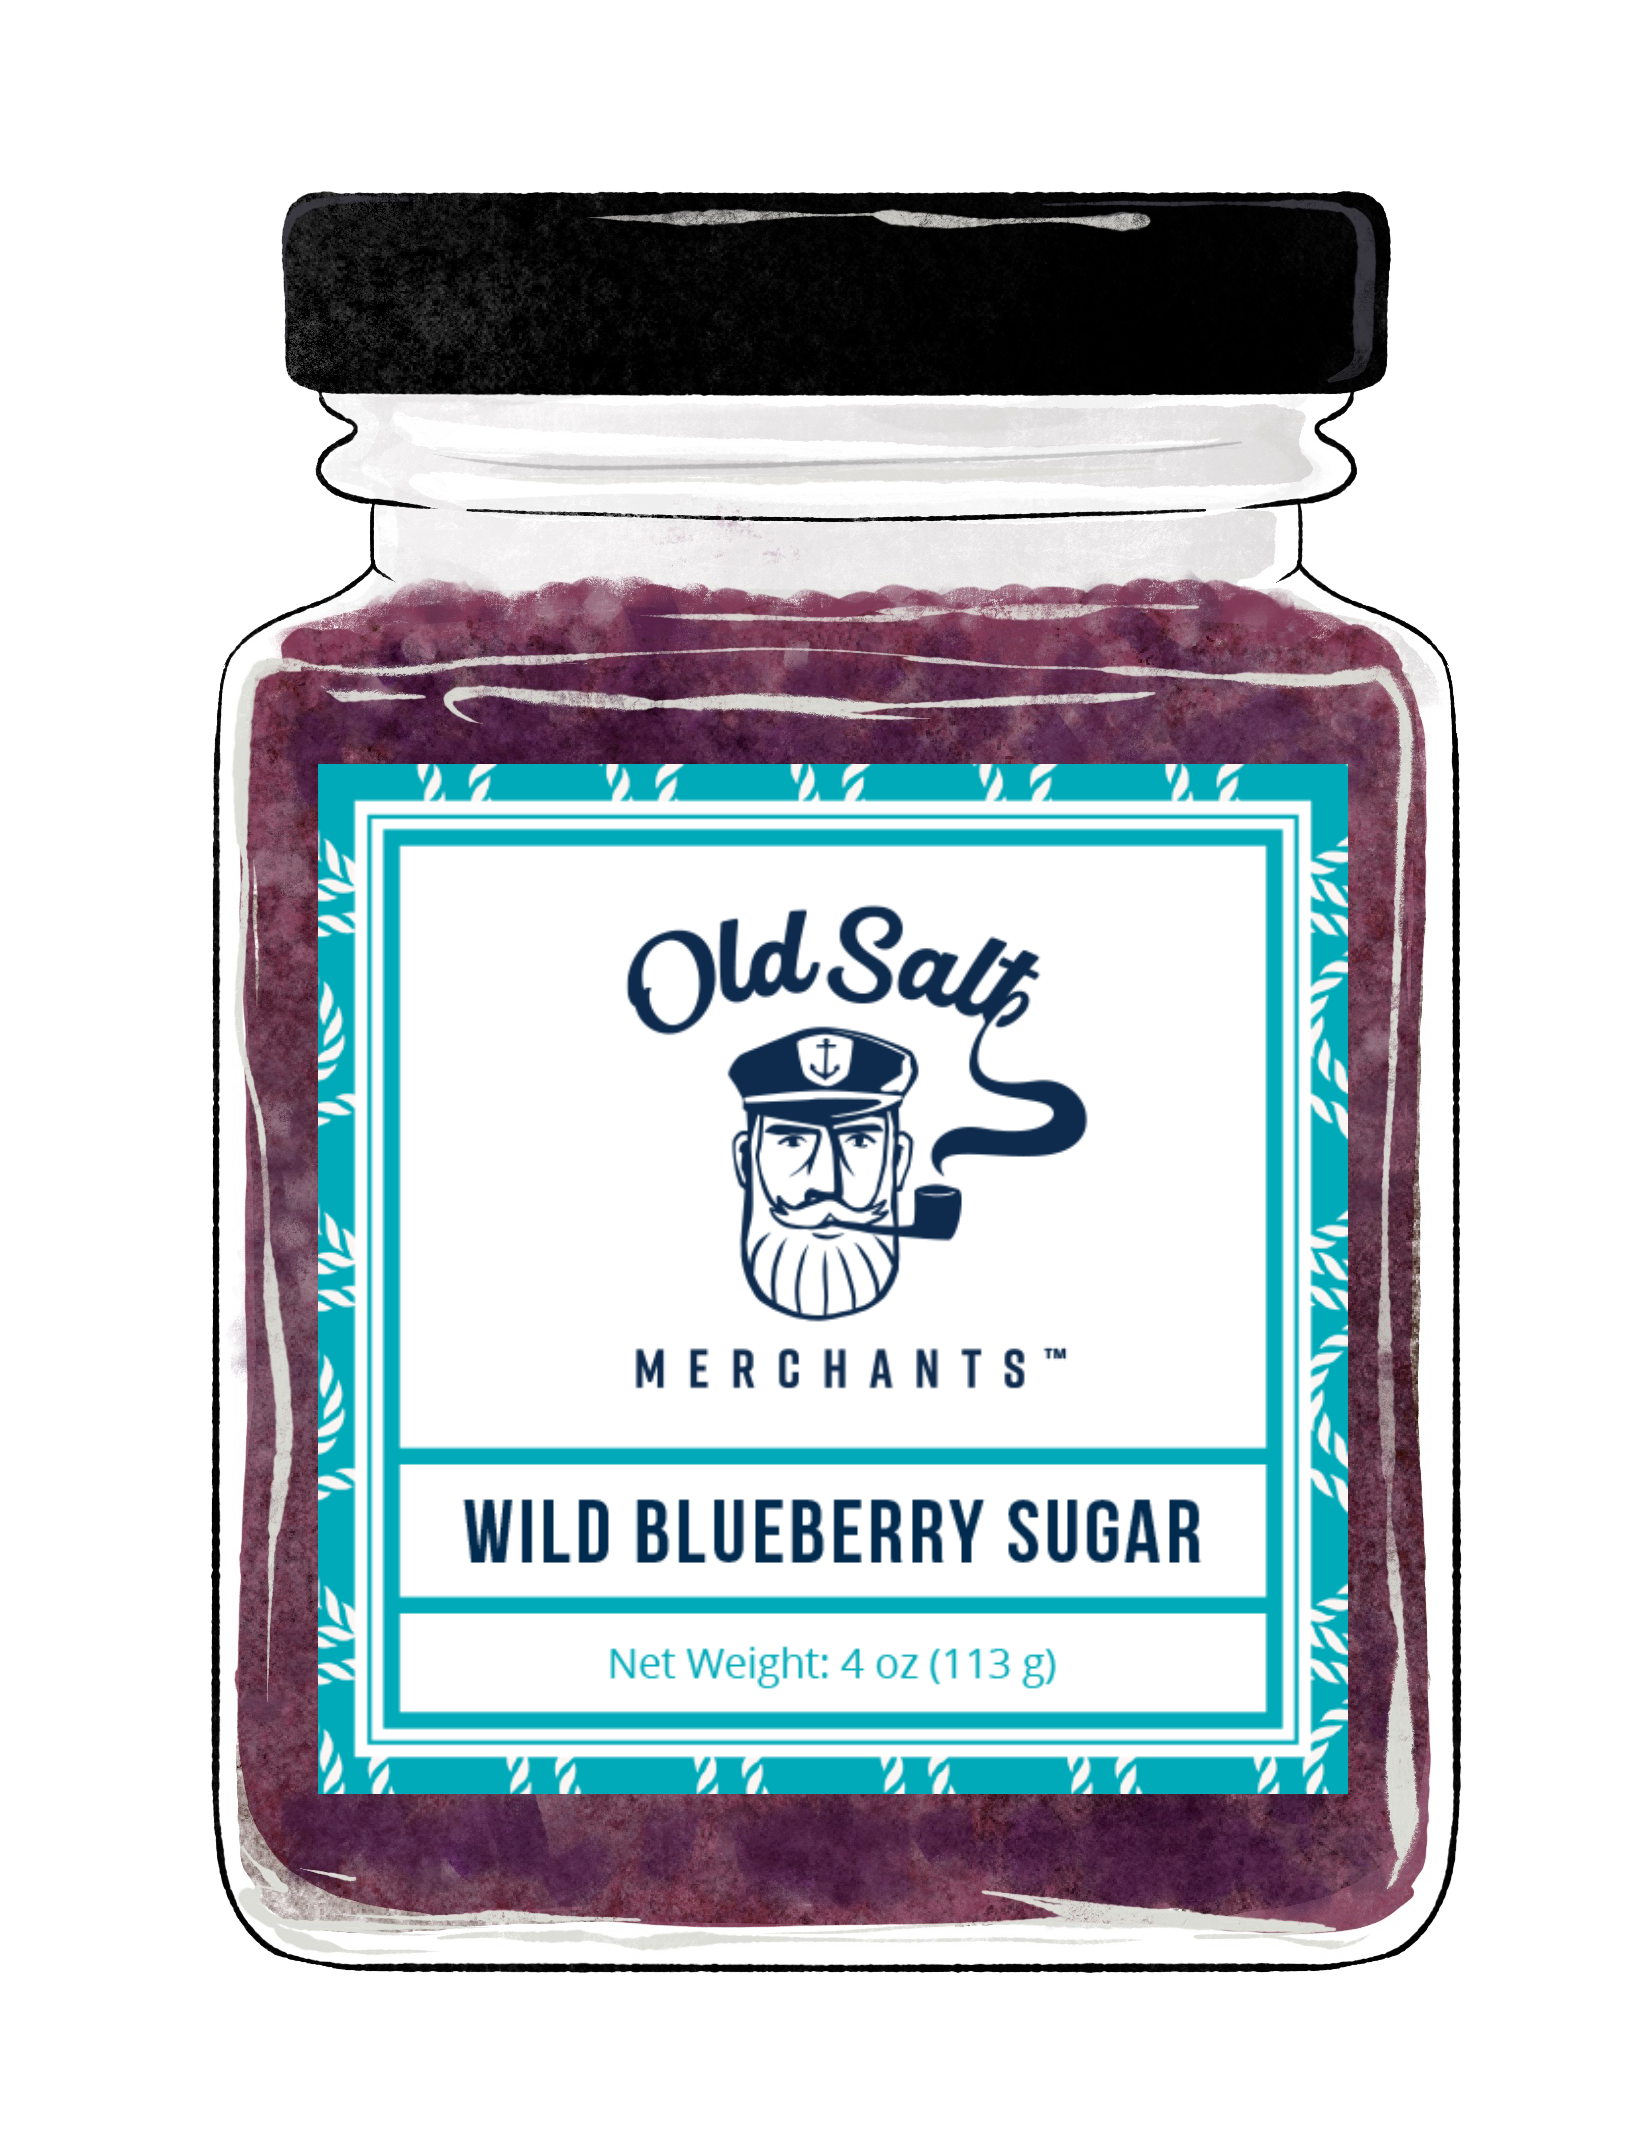 Wild Blueberry Sugar (Limited Edition) exclusive at Tastermonial